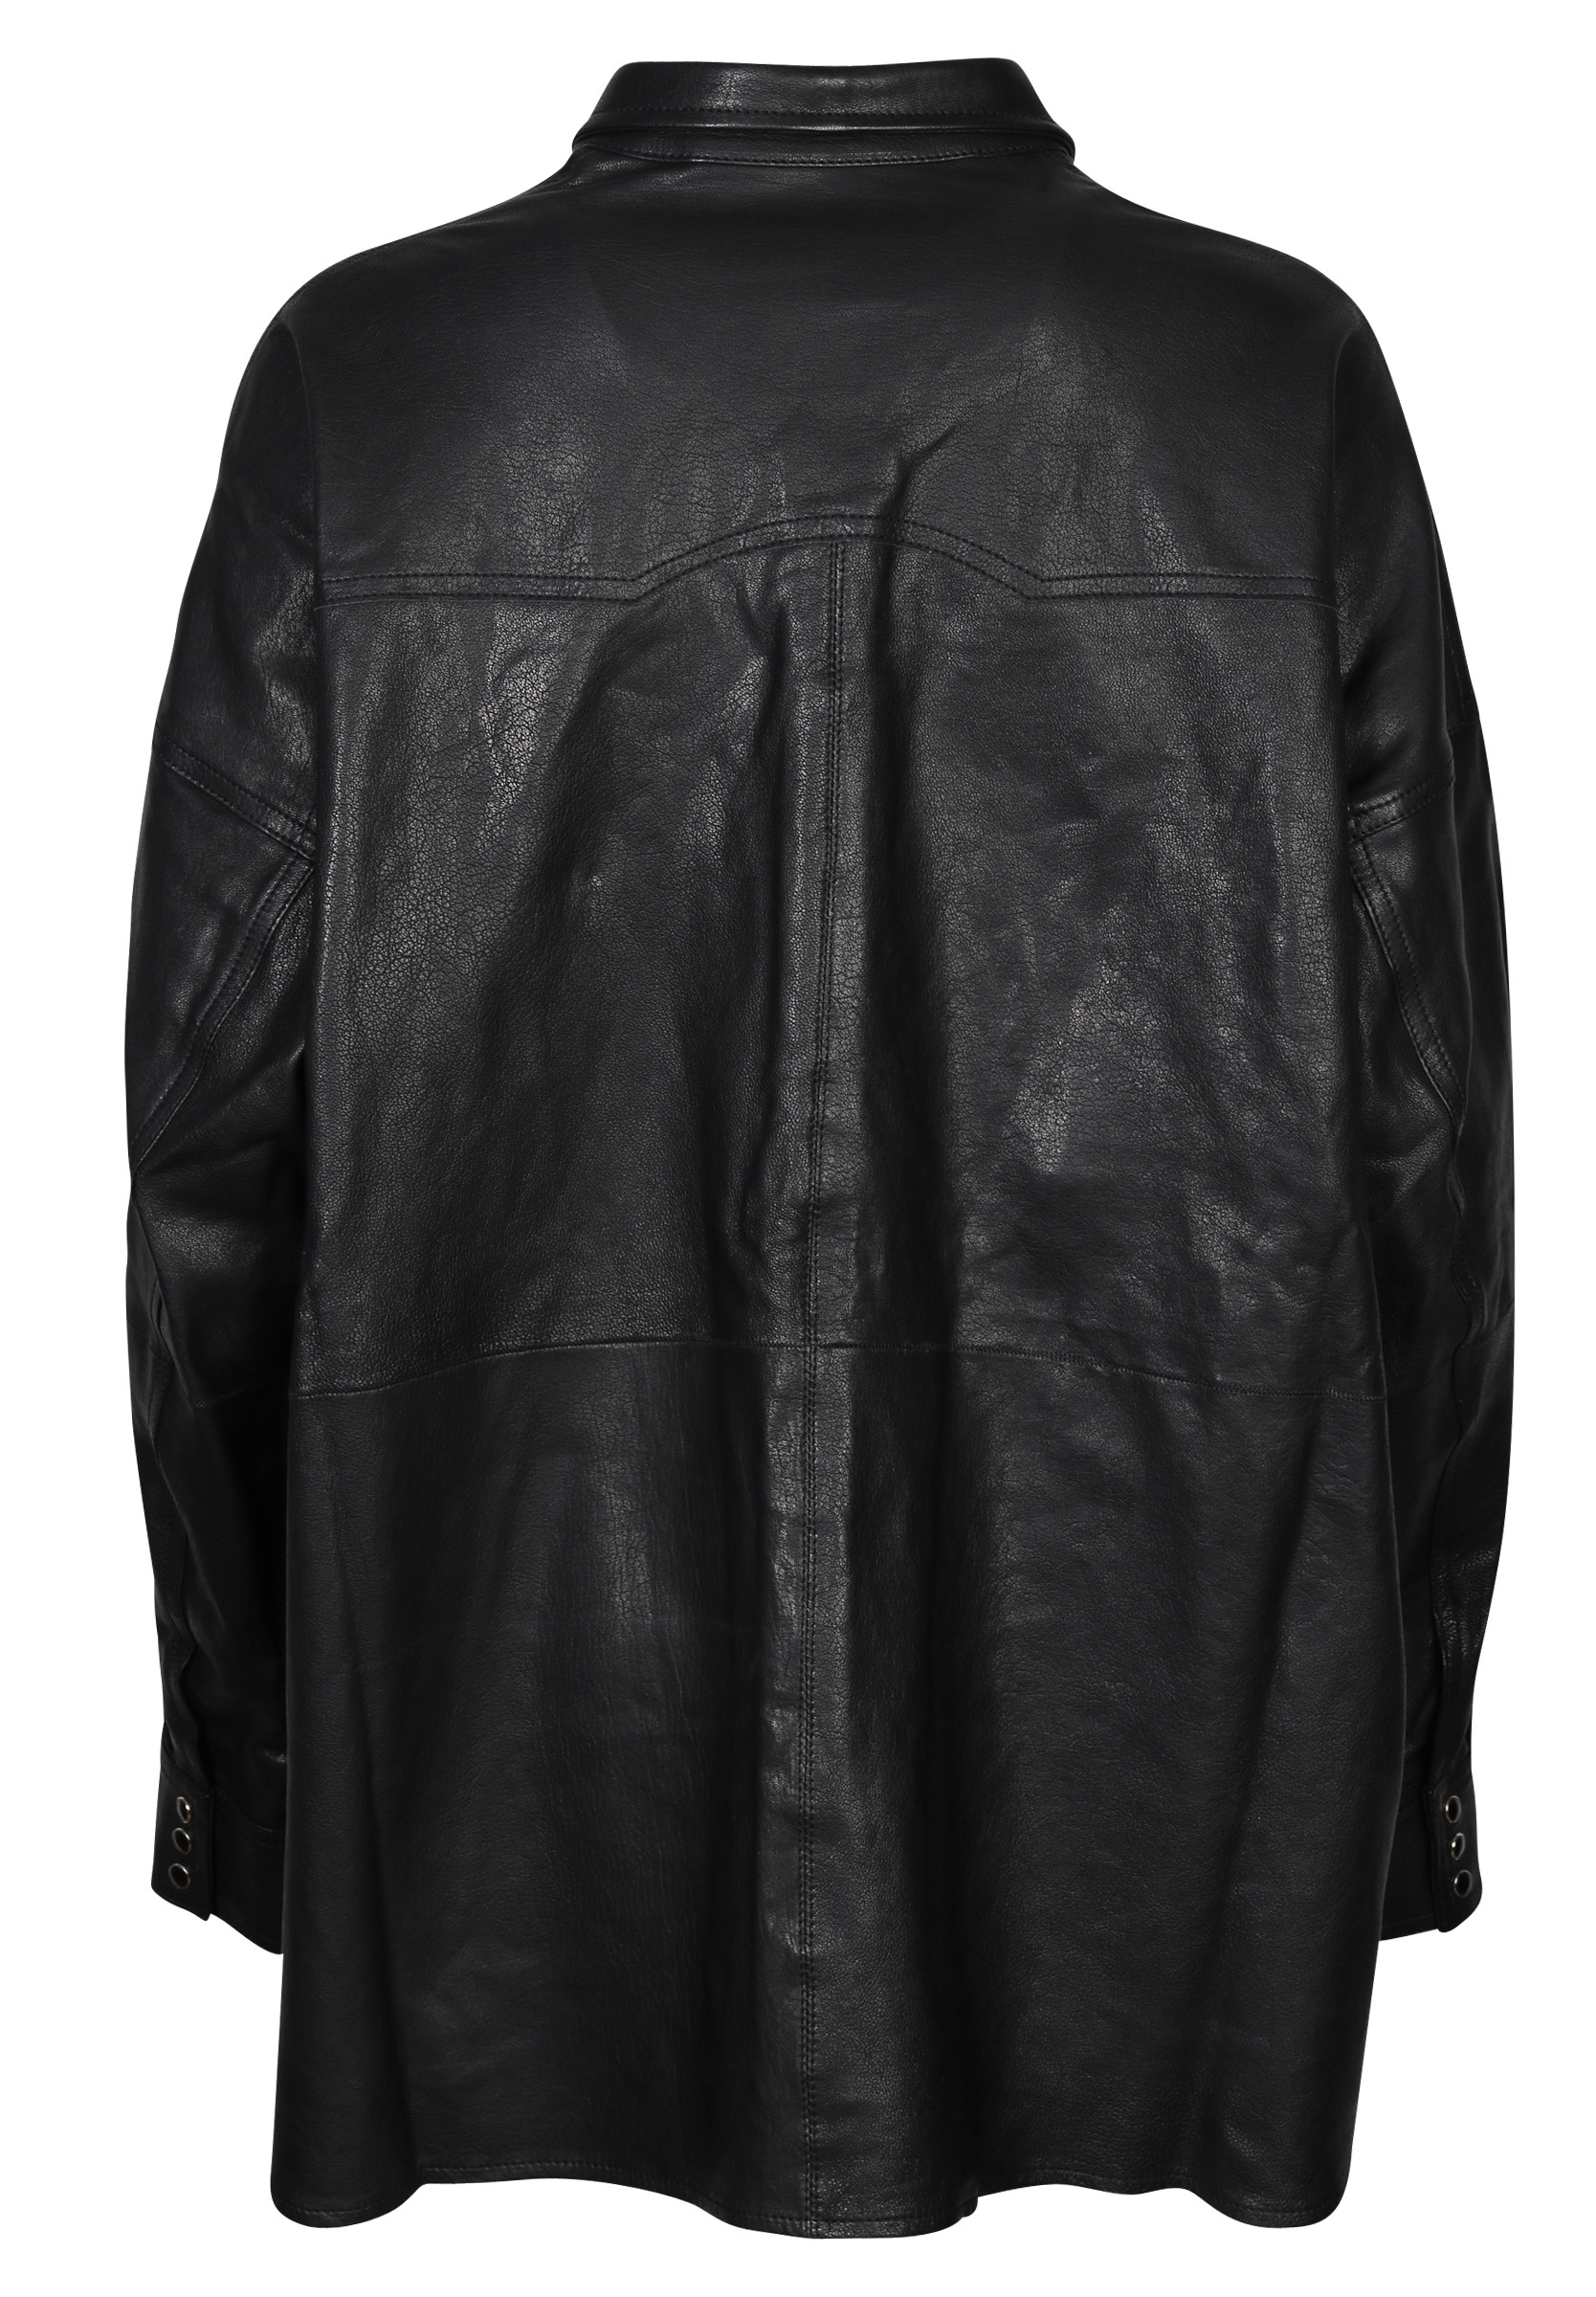 R13 Leather Overshirt Black With Fringes S